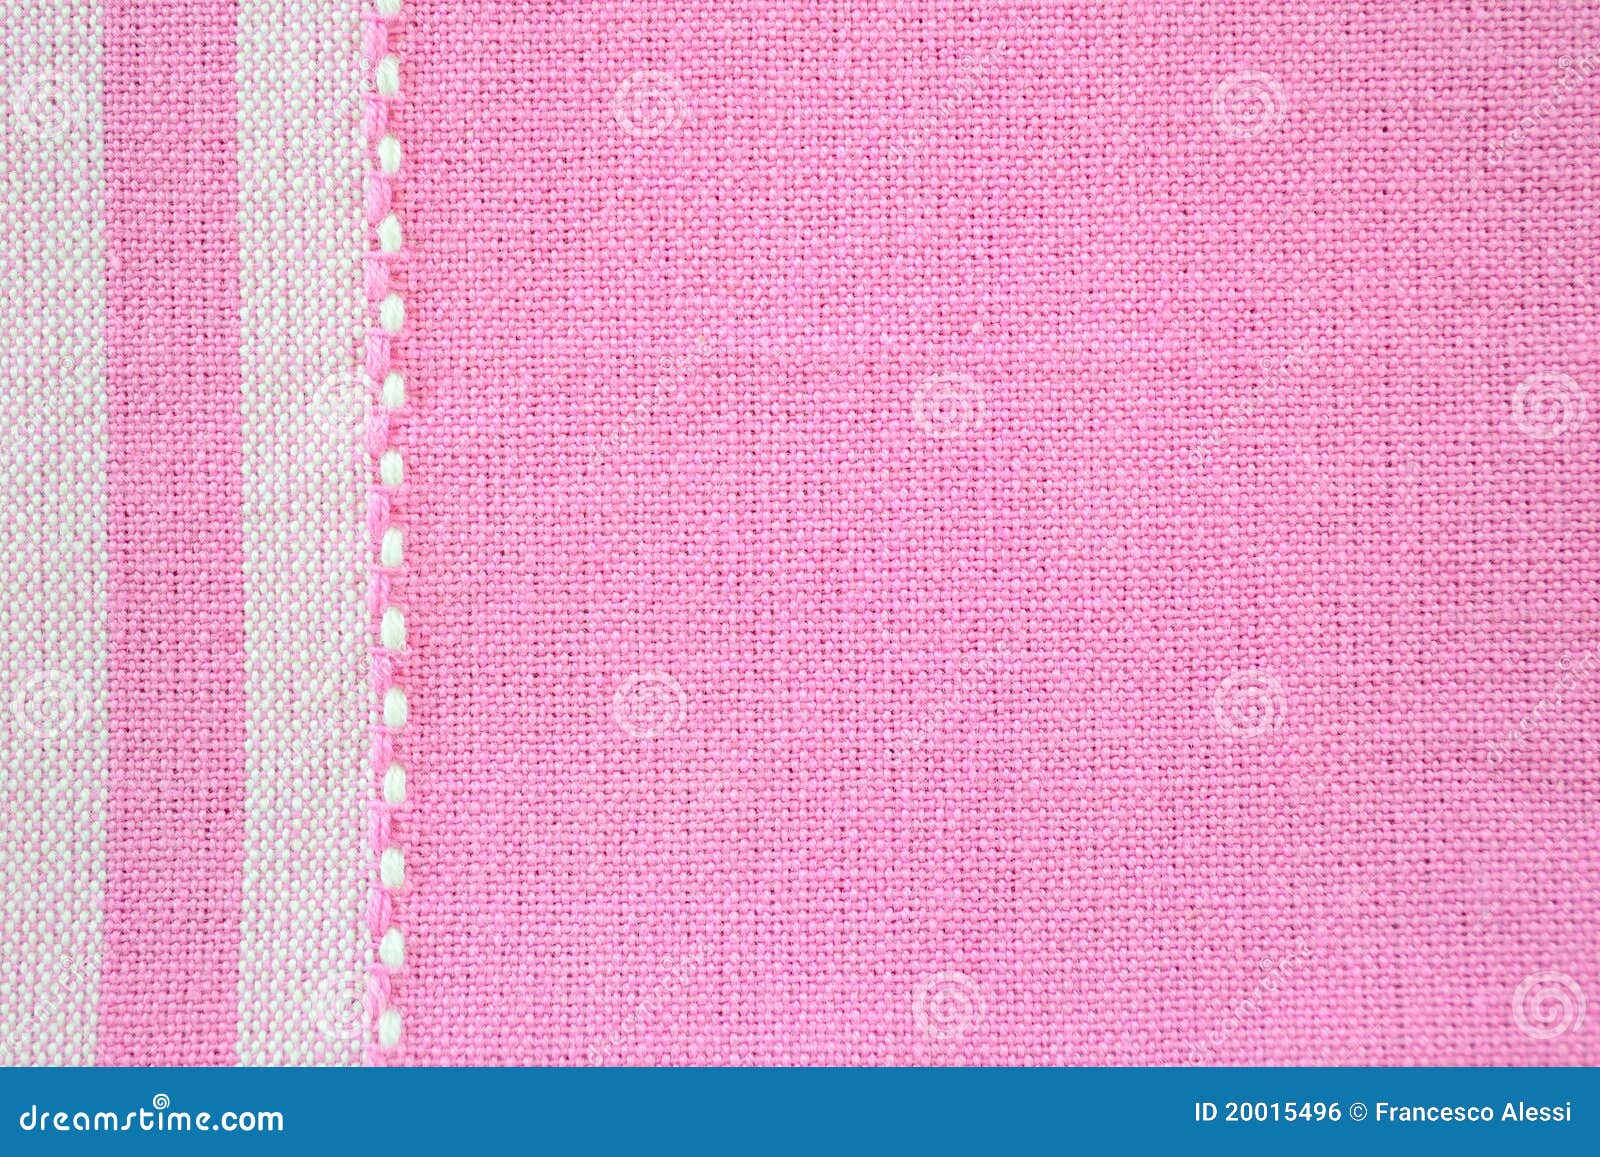 Springs Creative Light Pink Solid Cotton Fabric